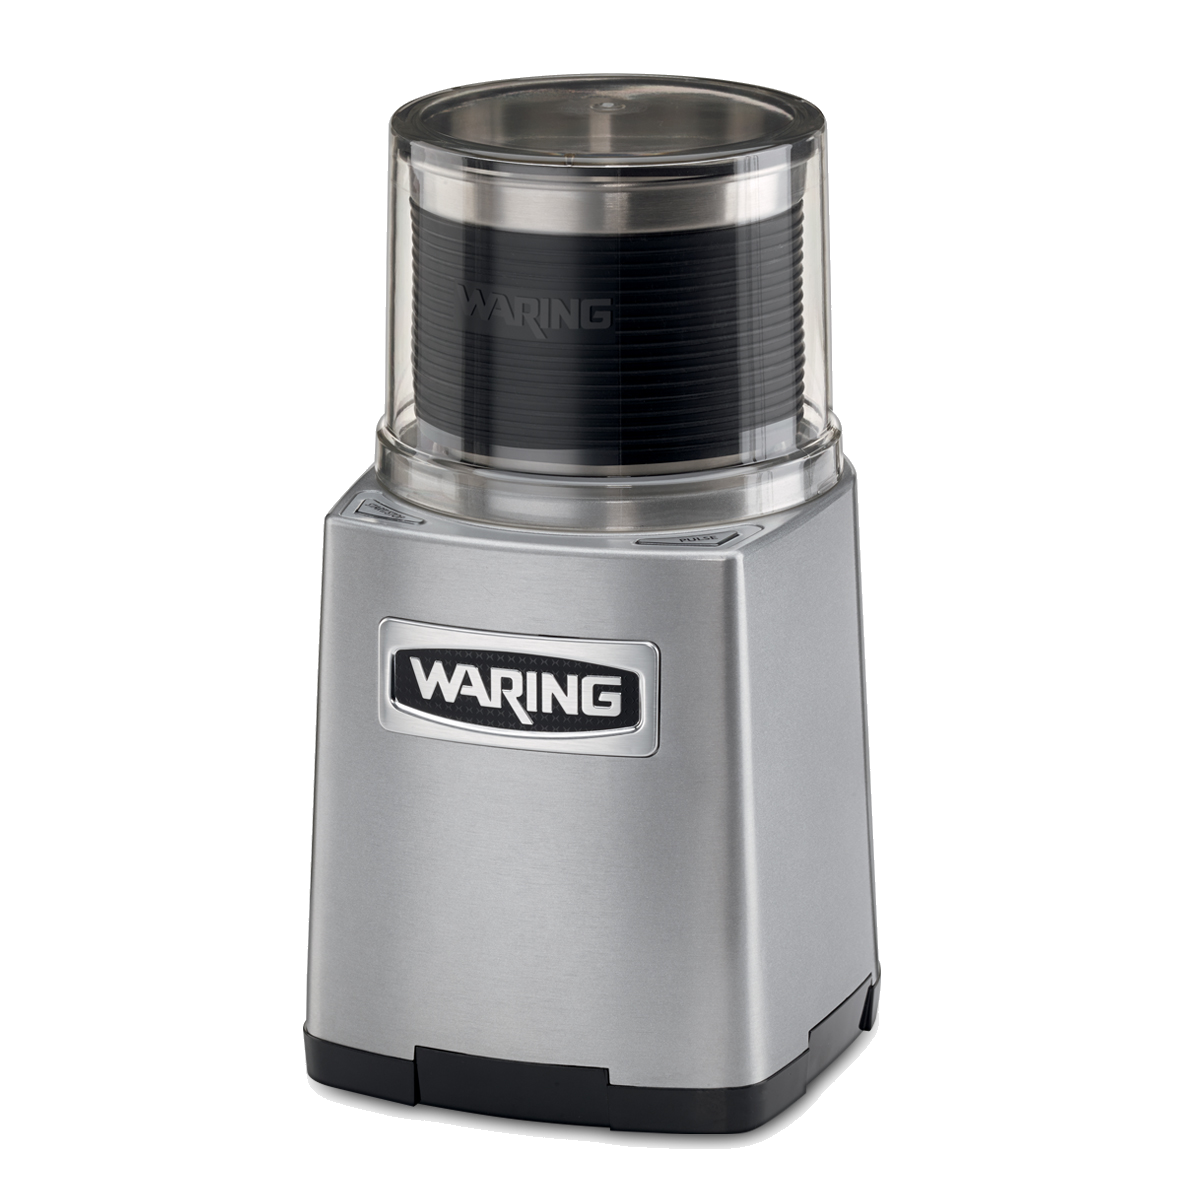 https://www.waringcommercialproducts.com/files/products/wsg60-waring-grinder-main.png